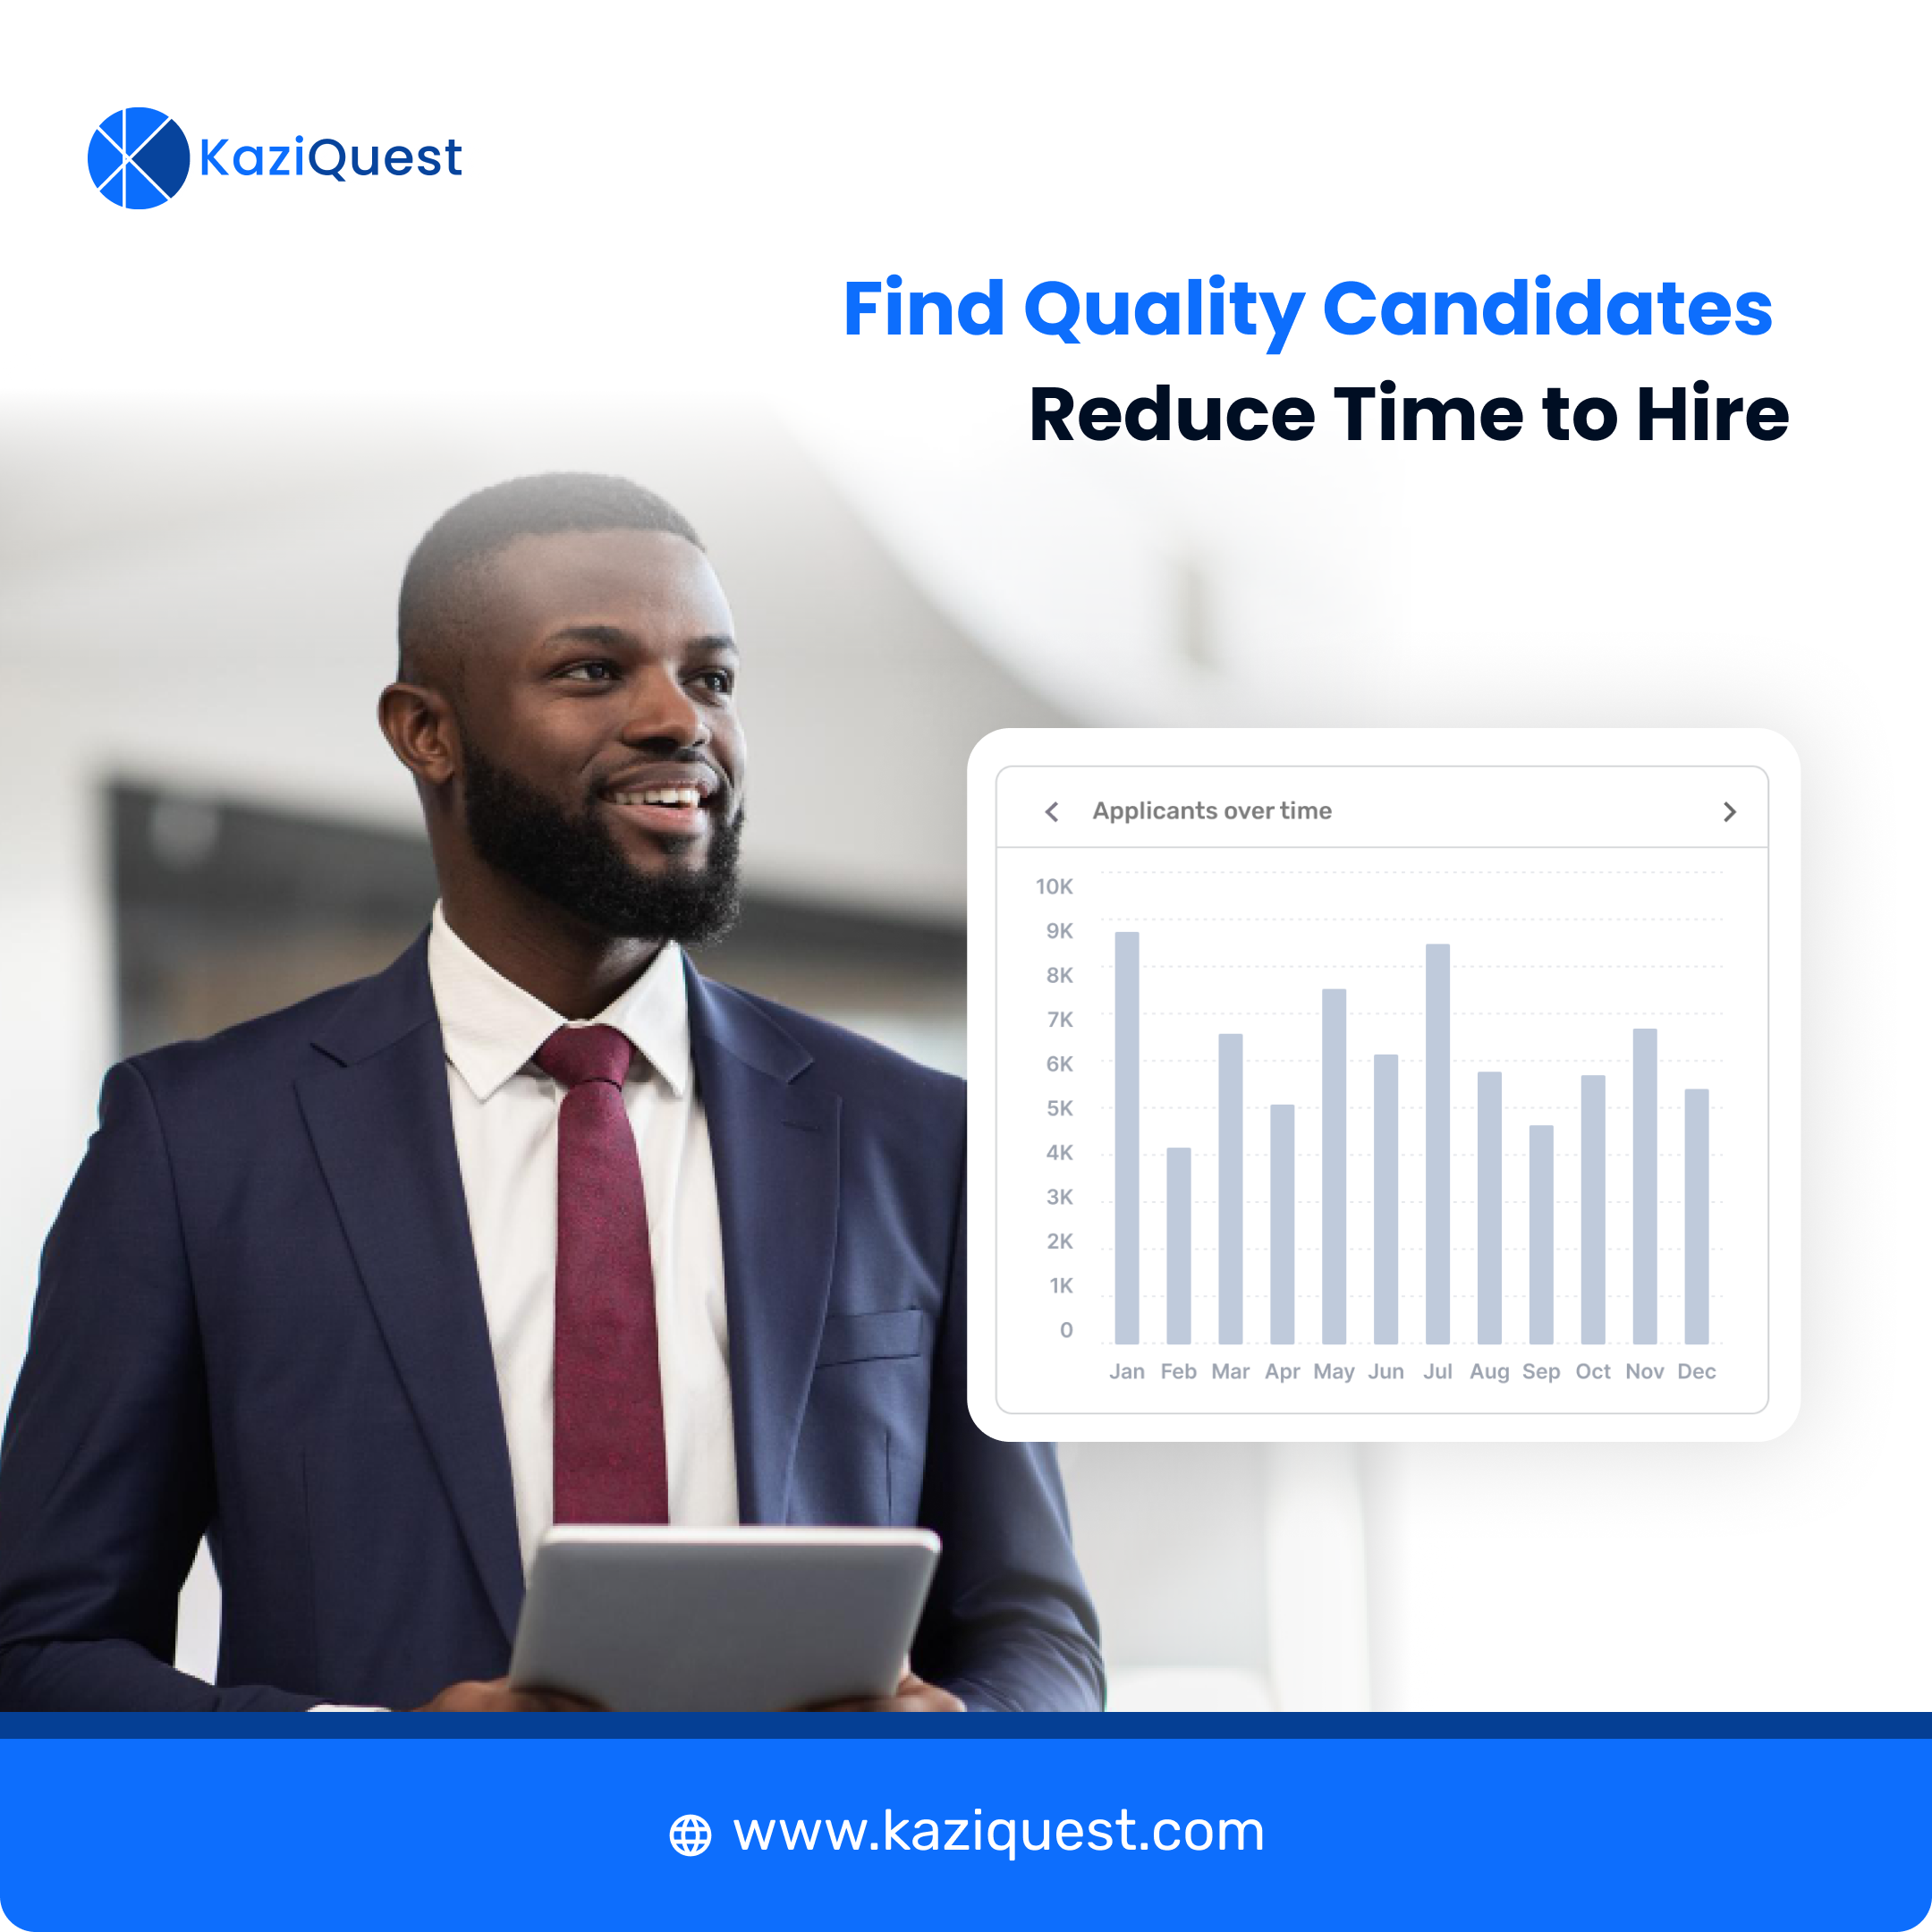 KaziQuest Recruiting Software Product Team Hiring Applicants Over Time